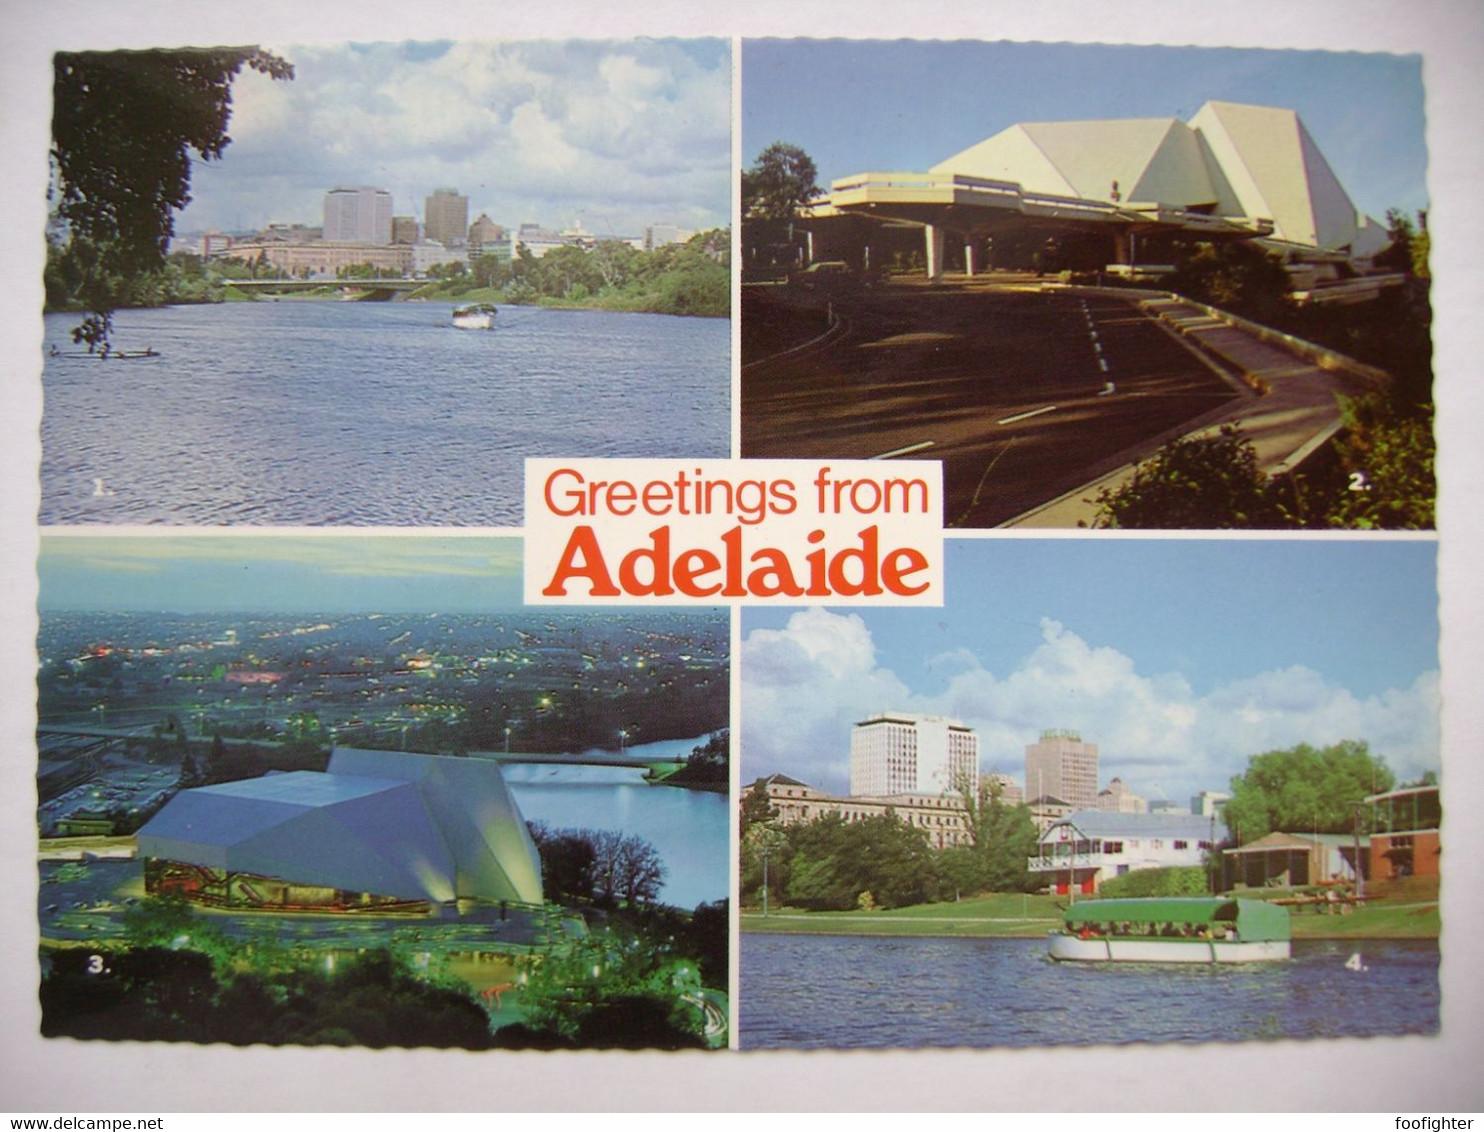 Adelaide - River Torrens, Festival Centre, "Popeye" With Boatshed In Background - Adelaide